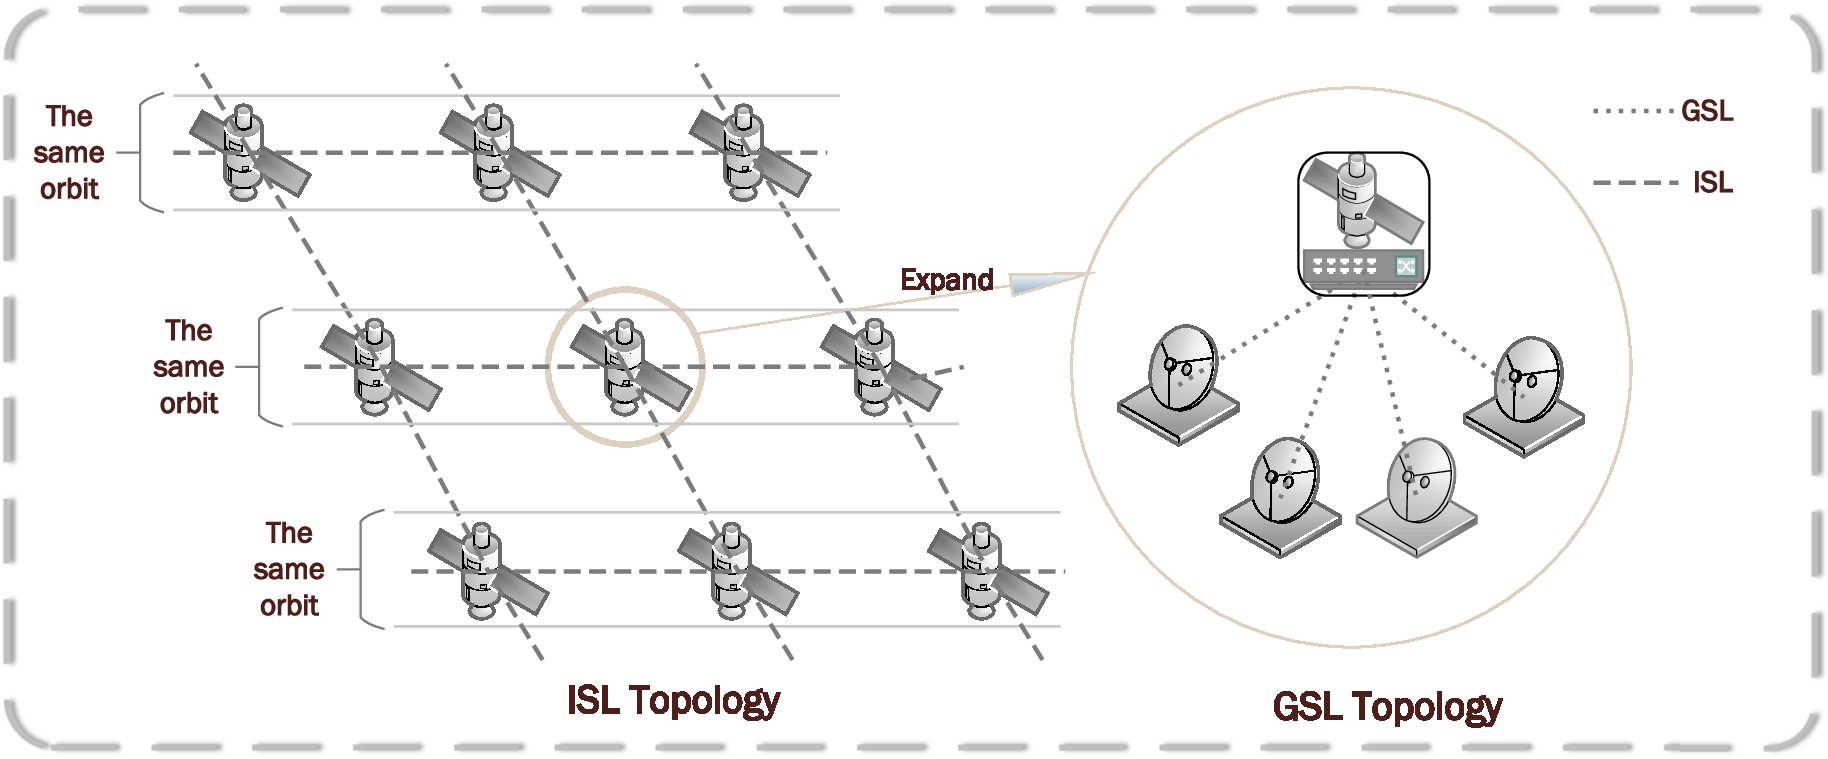 Topology of LEOCN, including ISL topology and GSL topology. ISL topology describes the connection between satellites, GSL topology describes the connection between satellite and ground station.